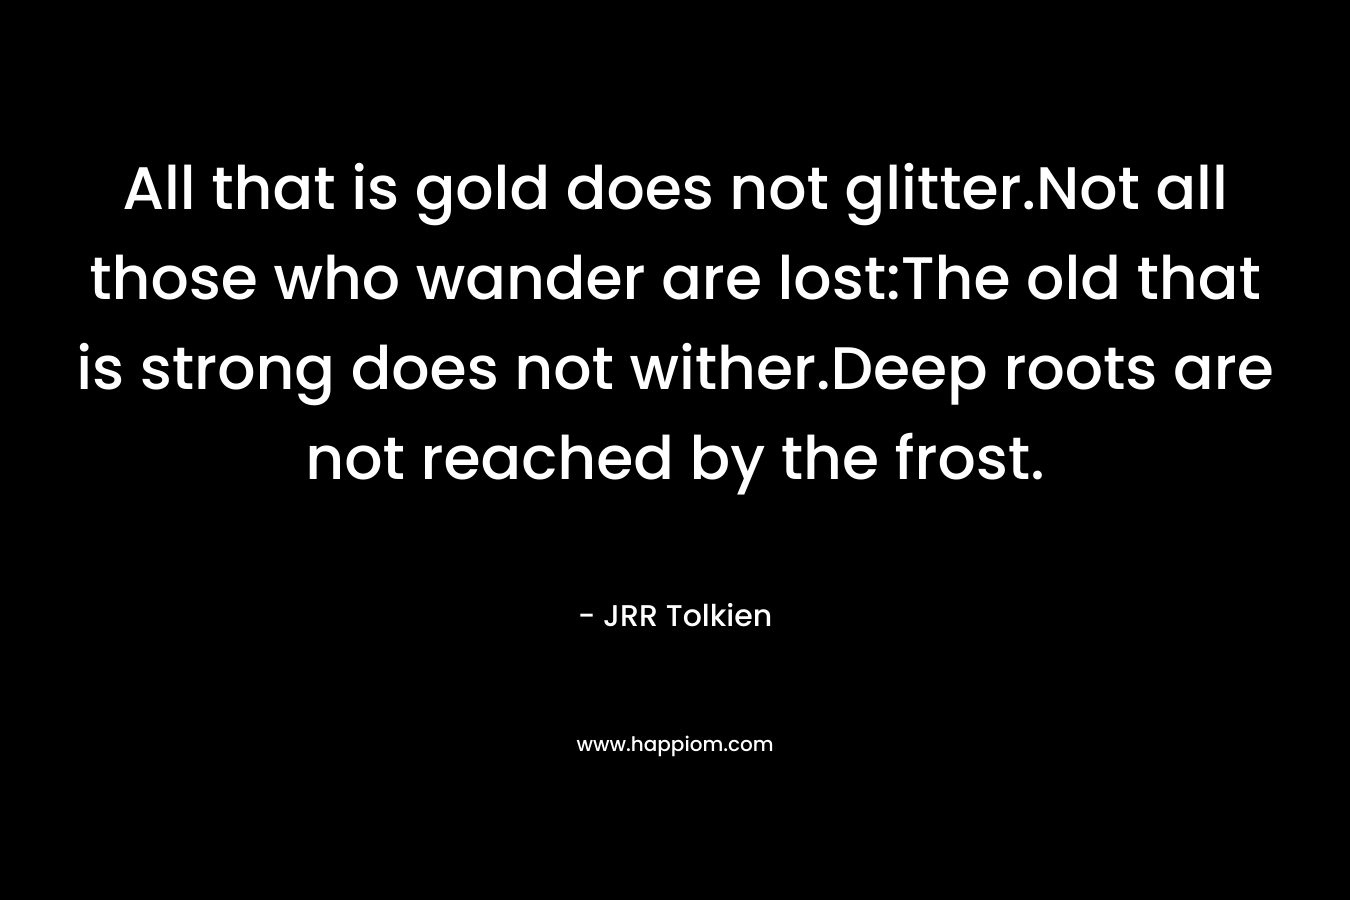 All that is gold does not glitter.Not all those who wander are lost:The old that is strong does not wither.Deep roots are not reached by the frost. – JRR Tolkien